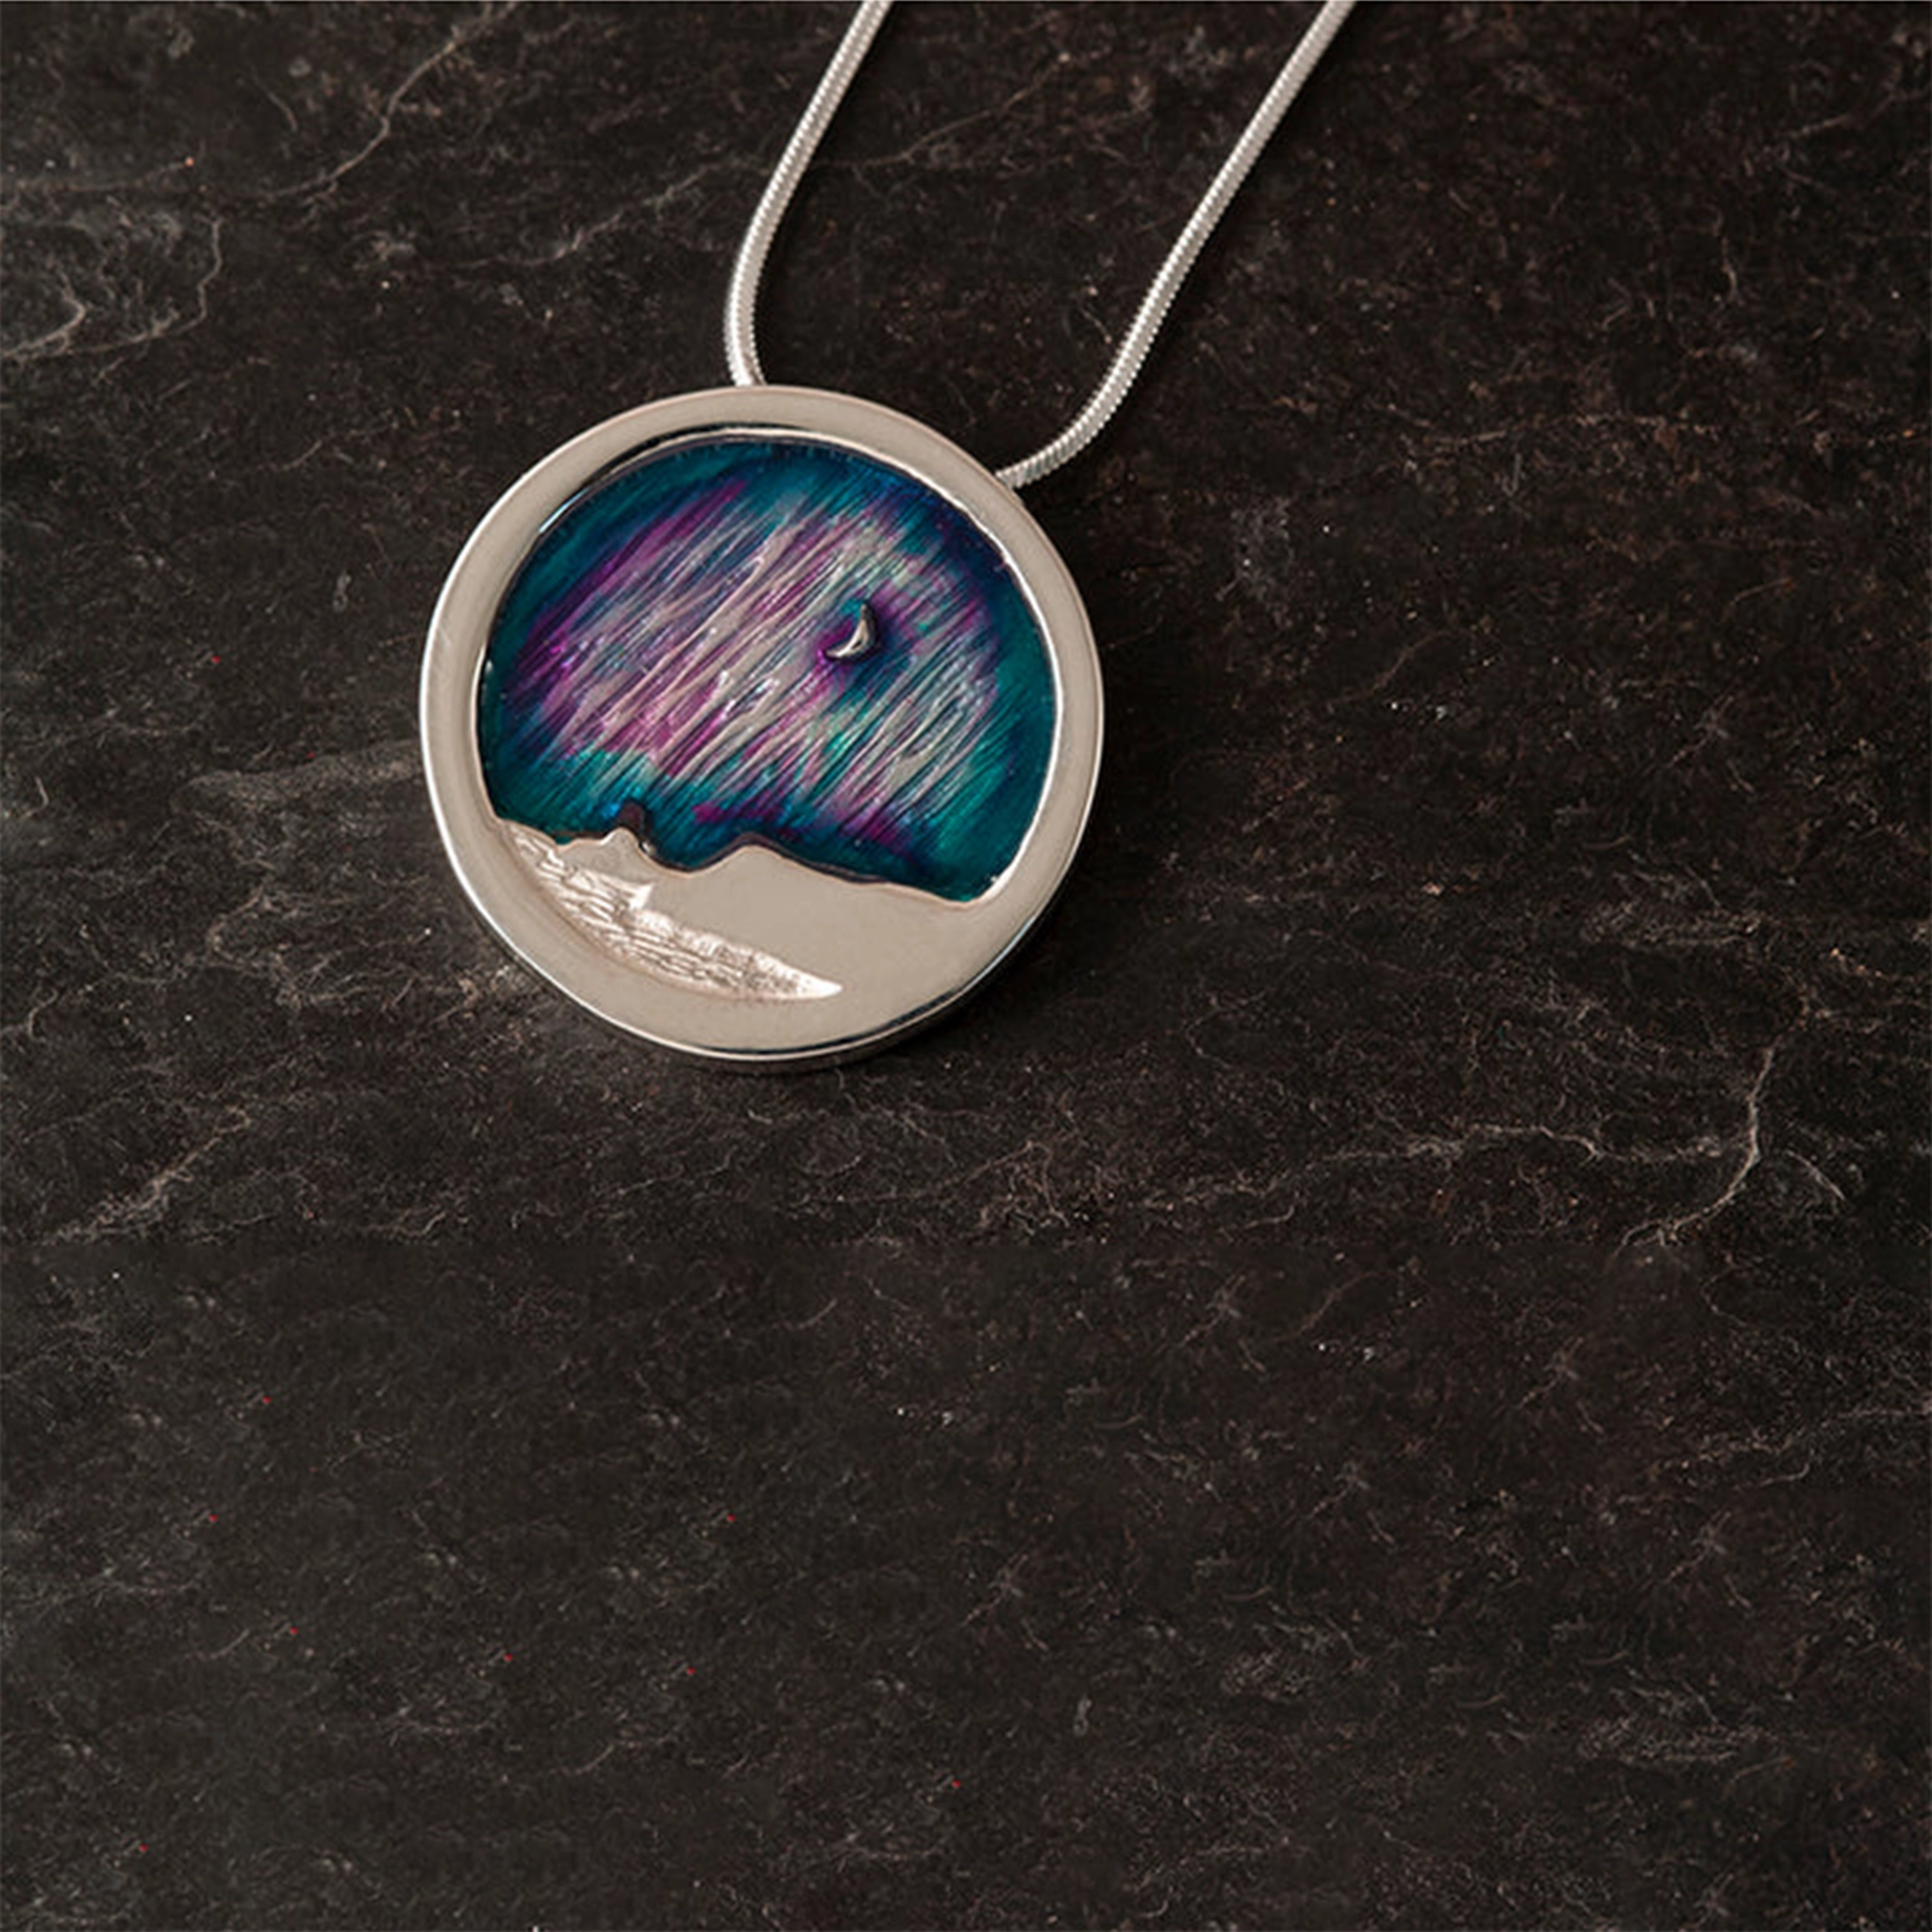 A round silver pendant with a Shetland cliff scene and purple and blue enamelled Northern Lights design